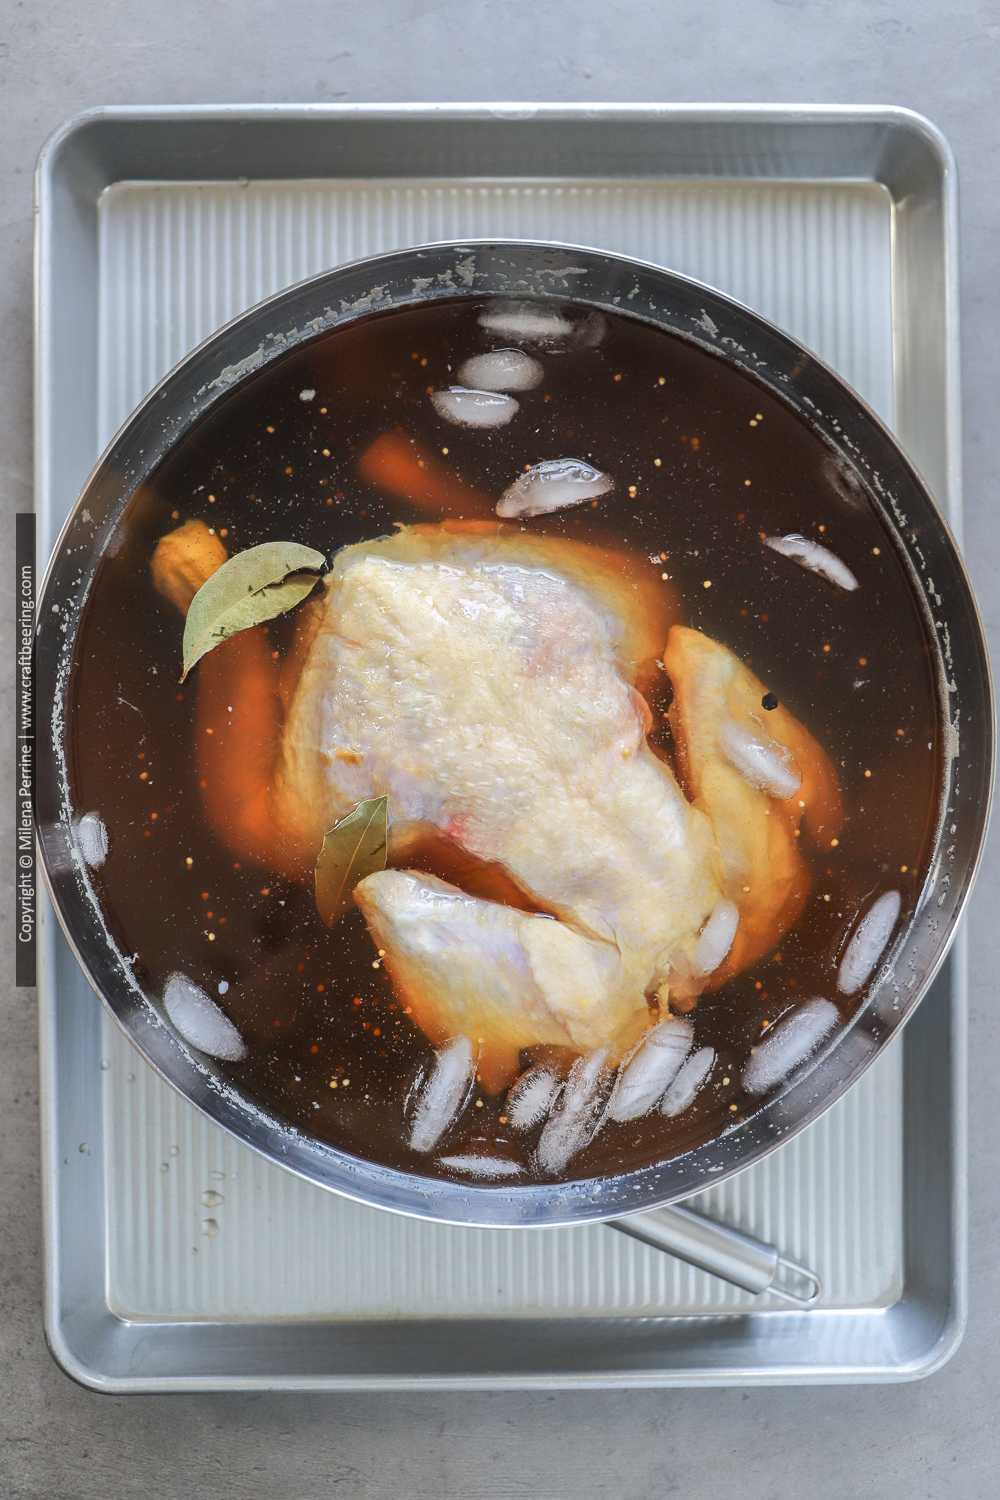 How to Brine Chicken for Smoking